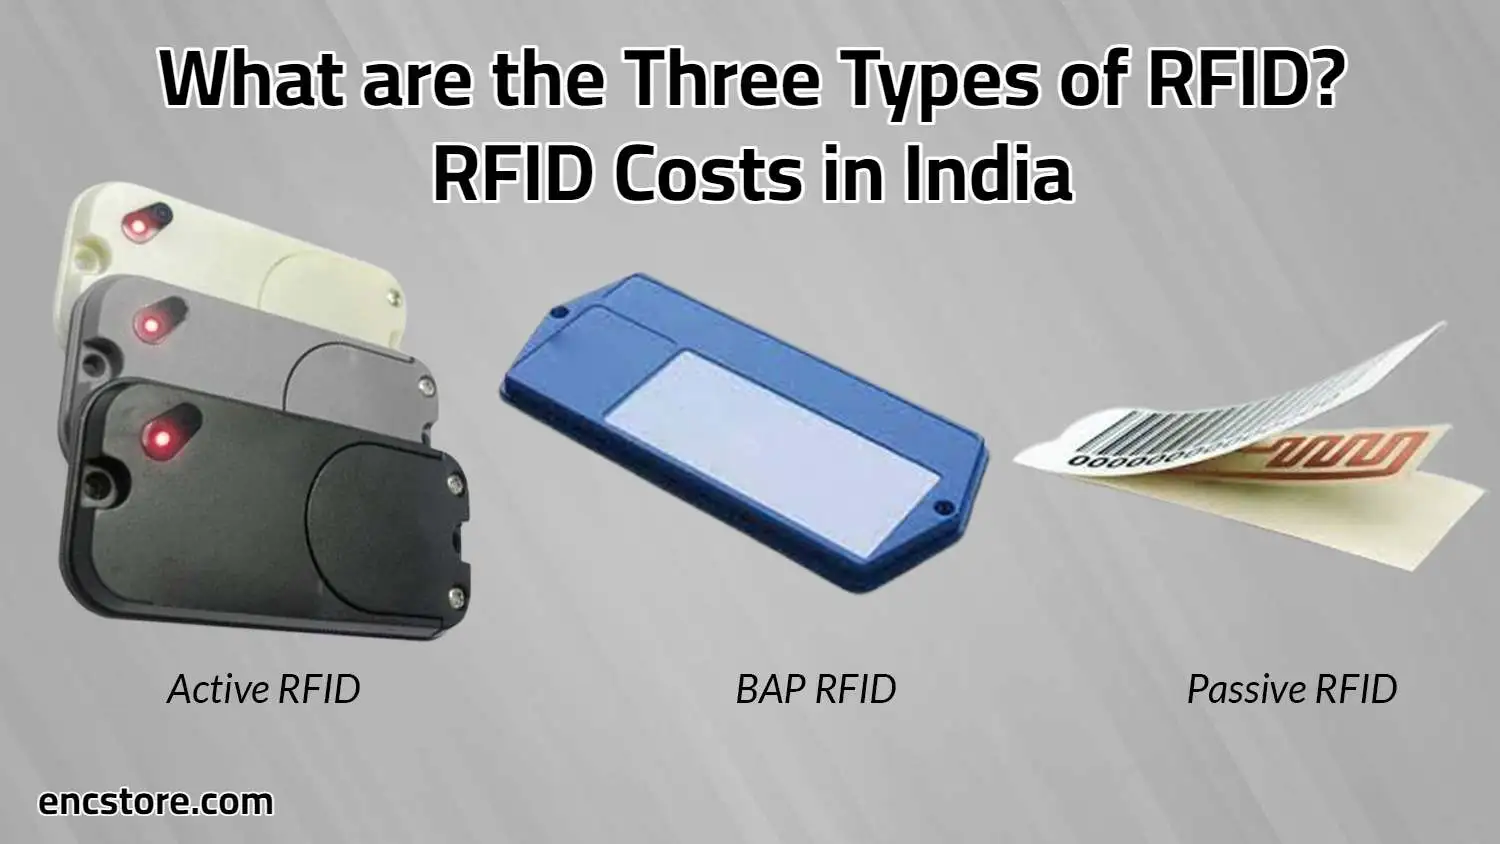  RFID Costs in India